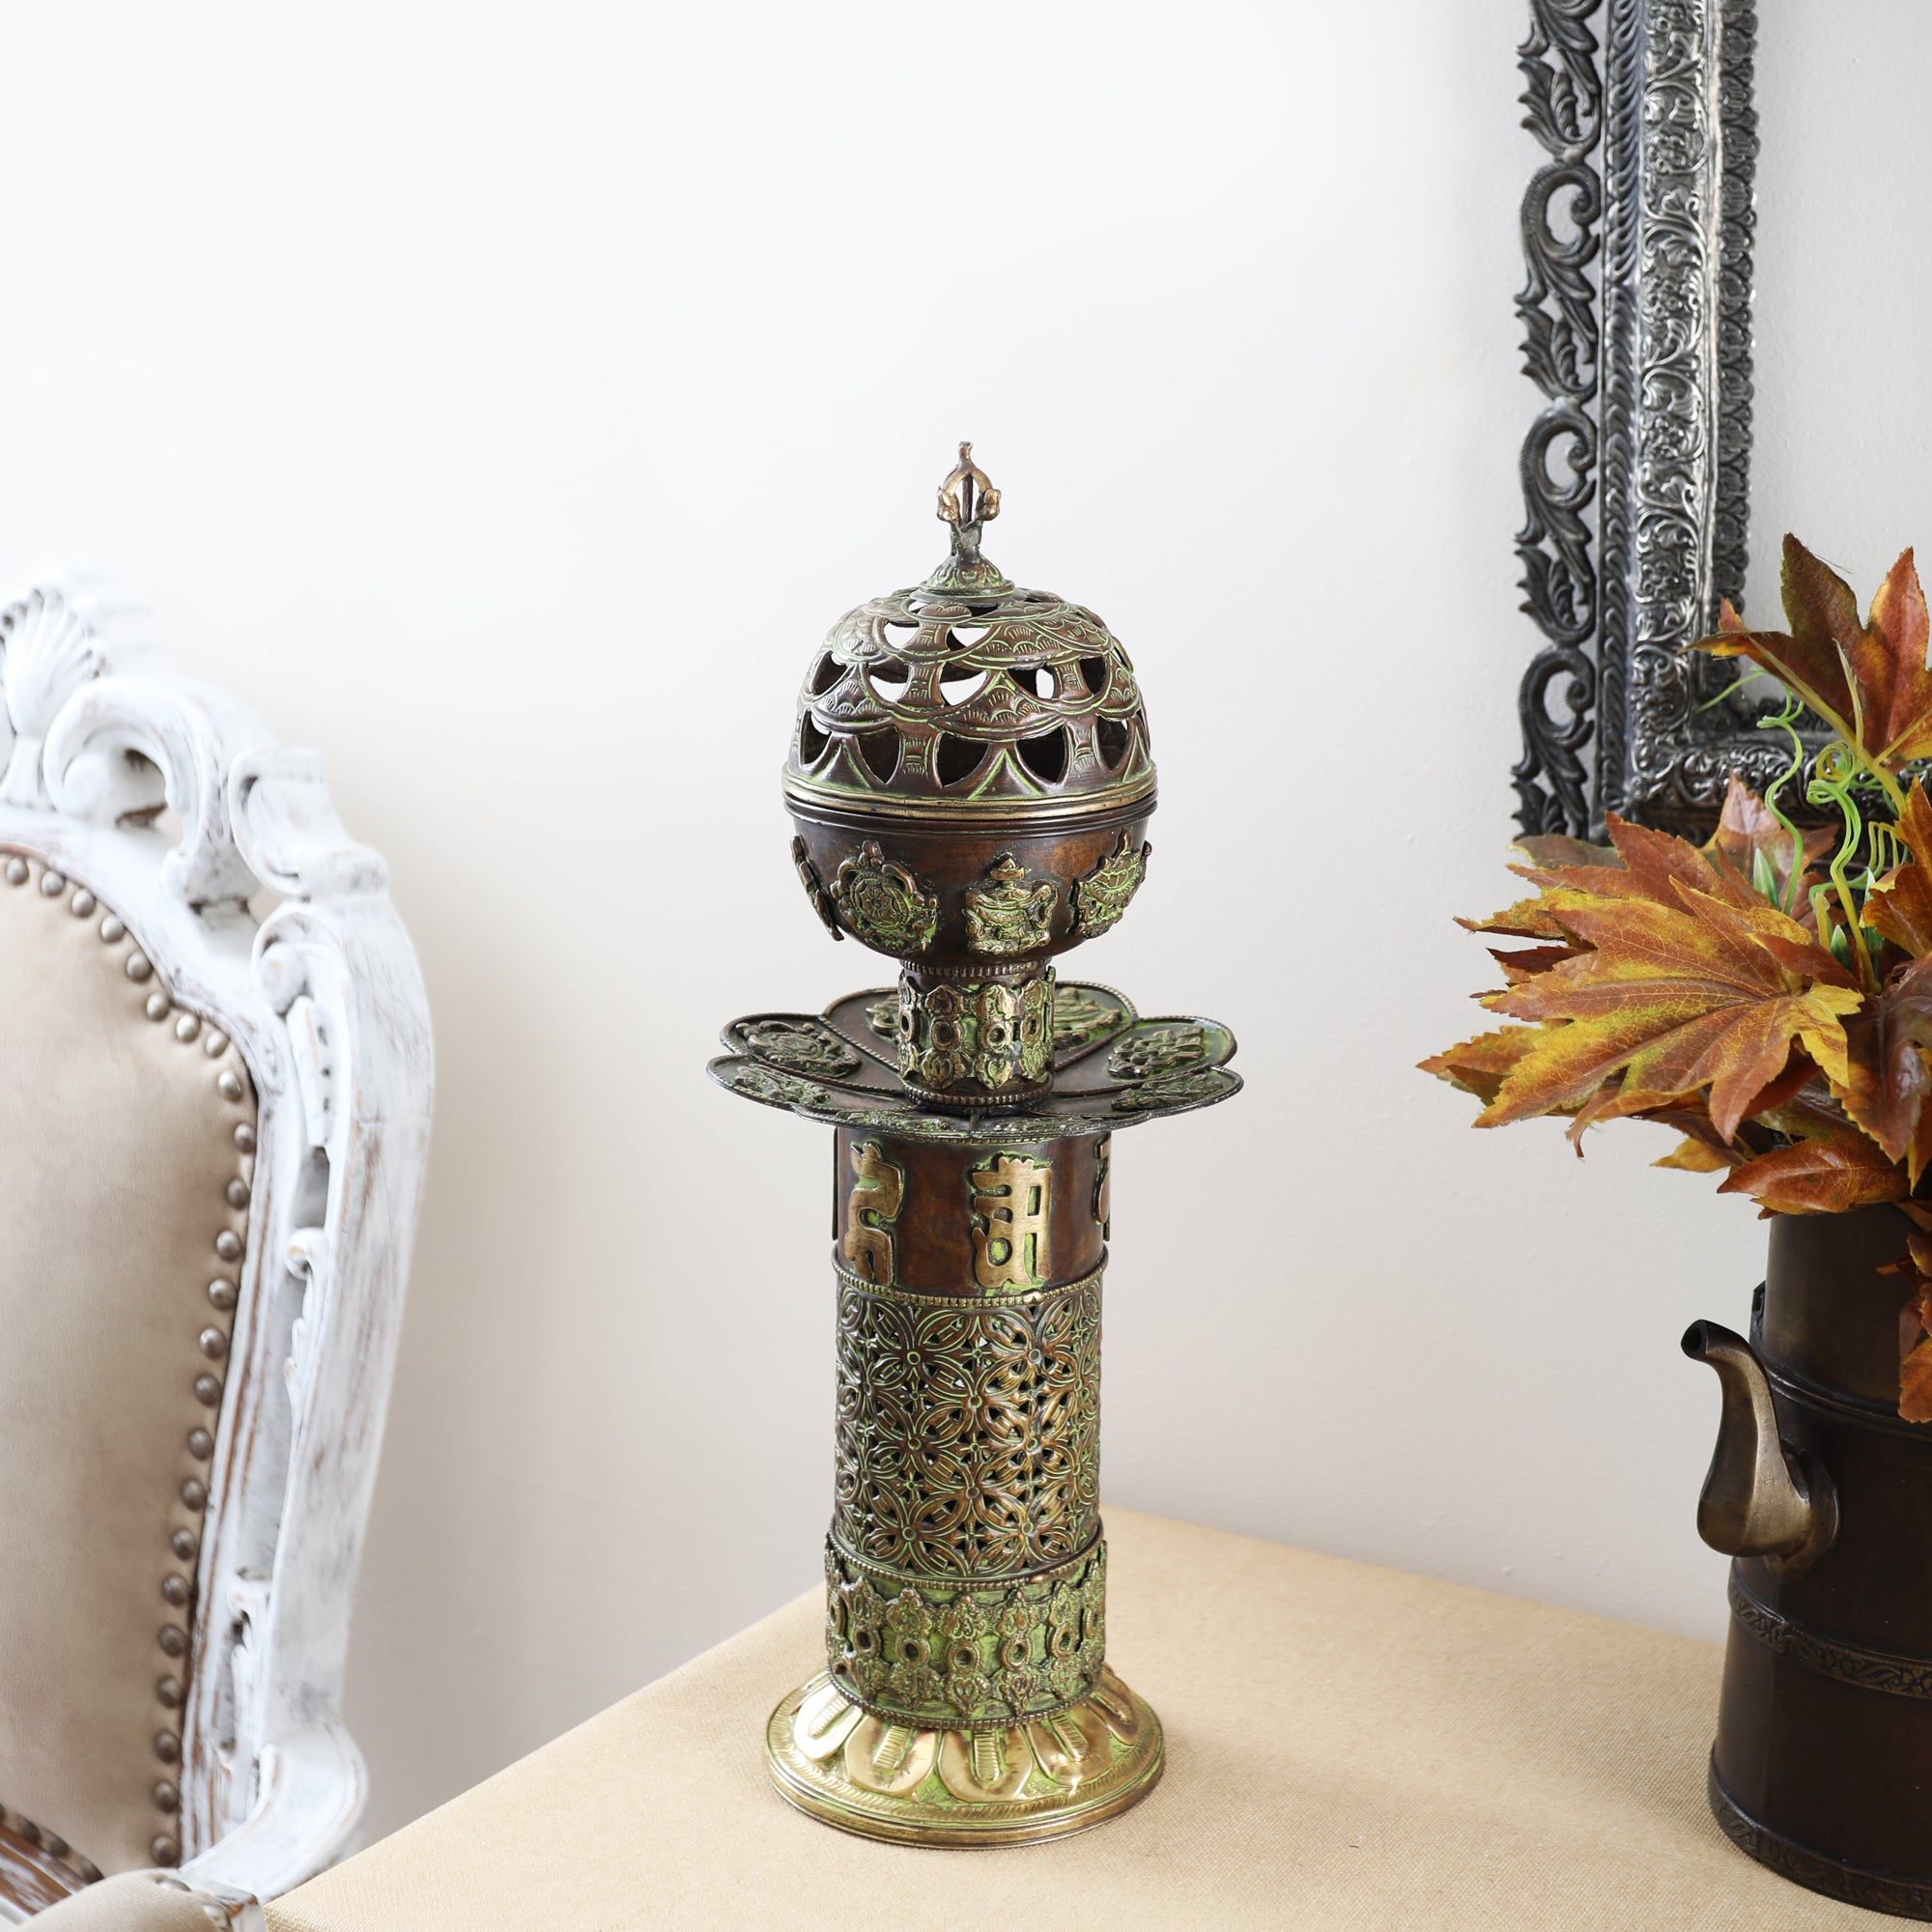 The Meshed Dome - Antique Incense/Candle Holder